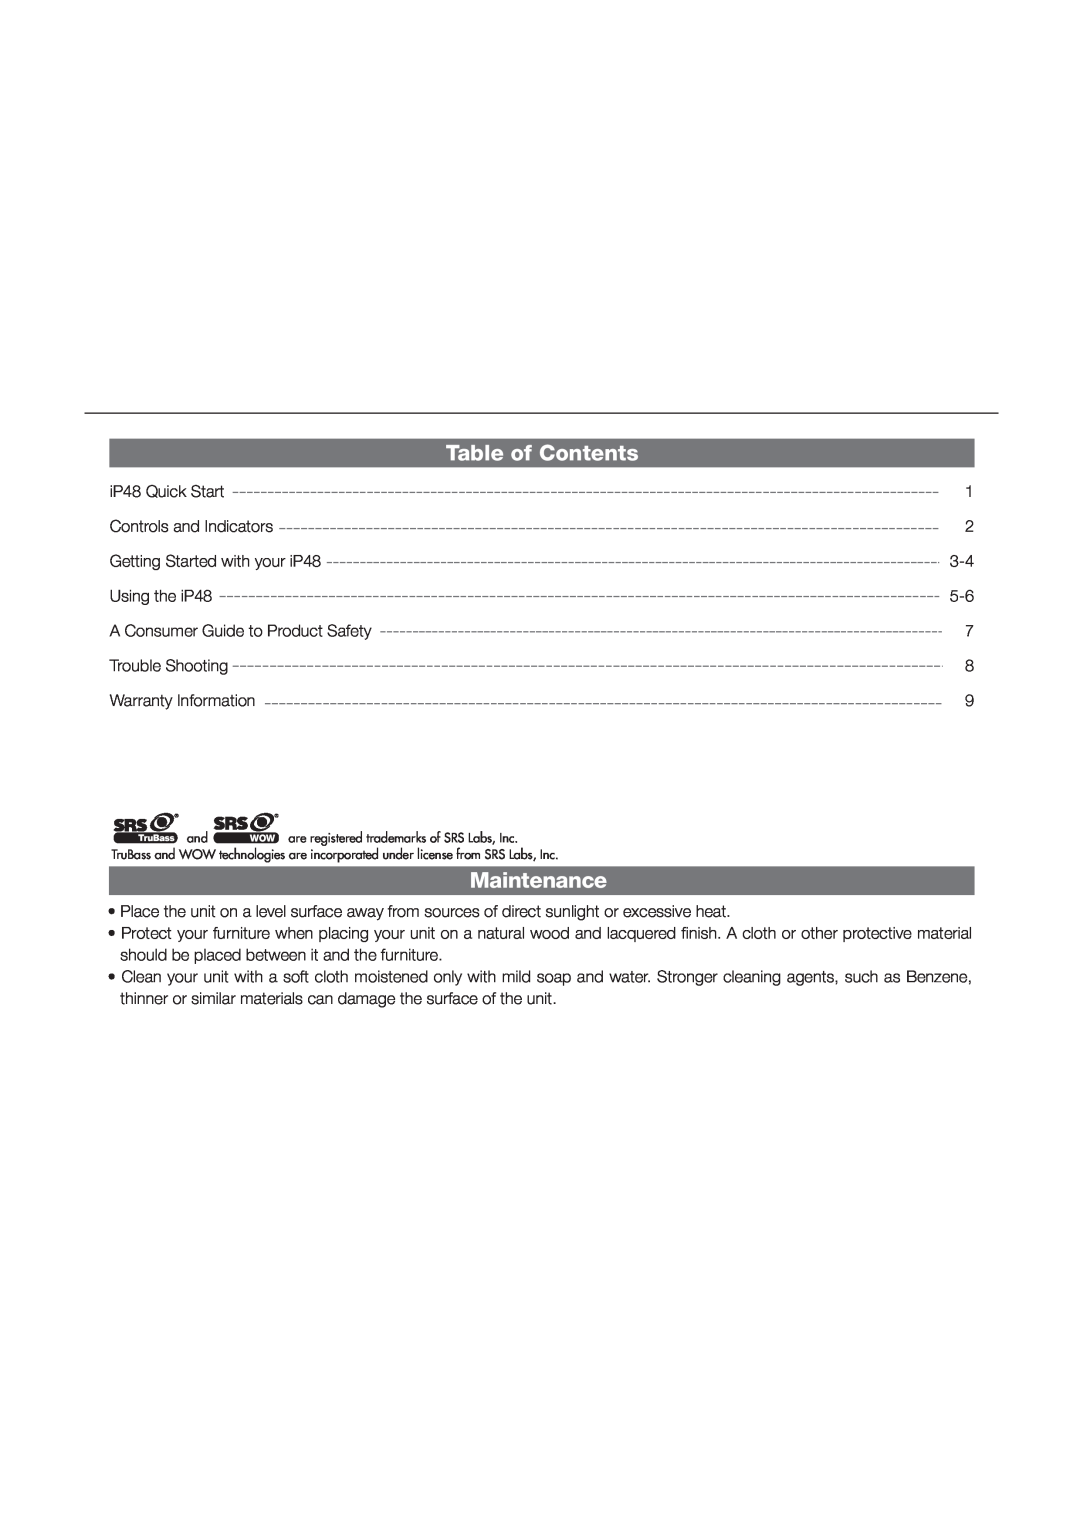 iHome IP48 manual Table of Contents, Maintenance 